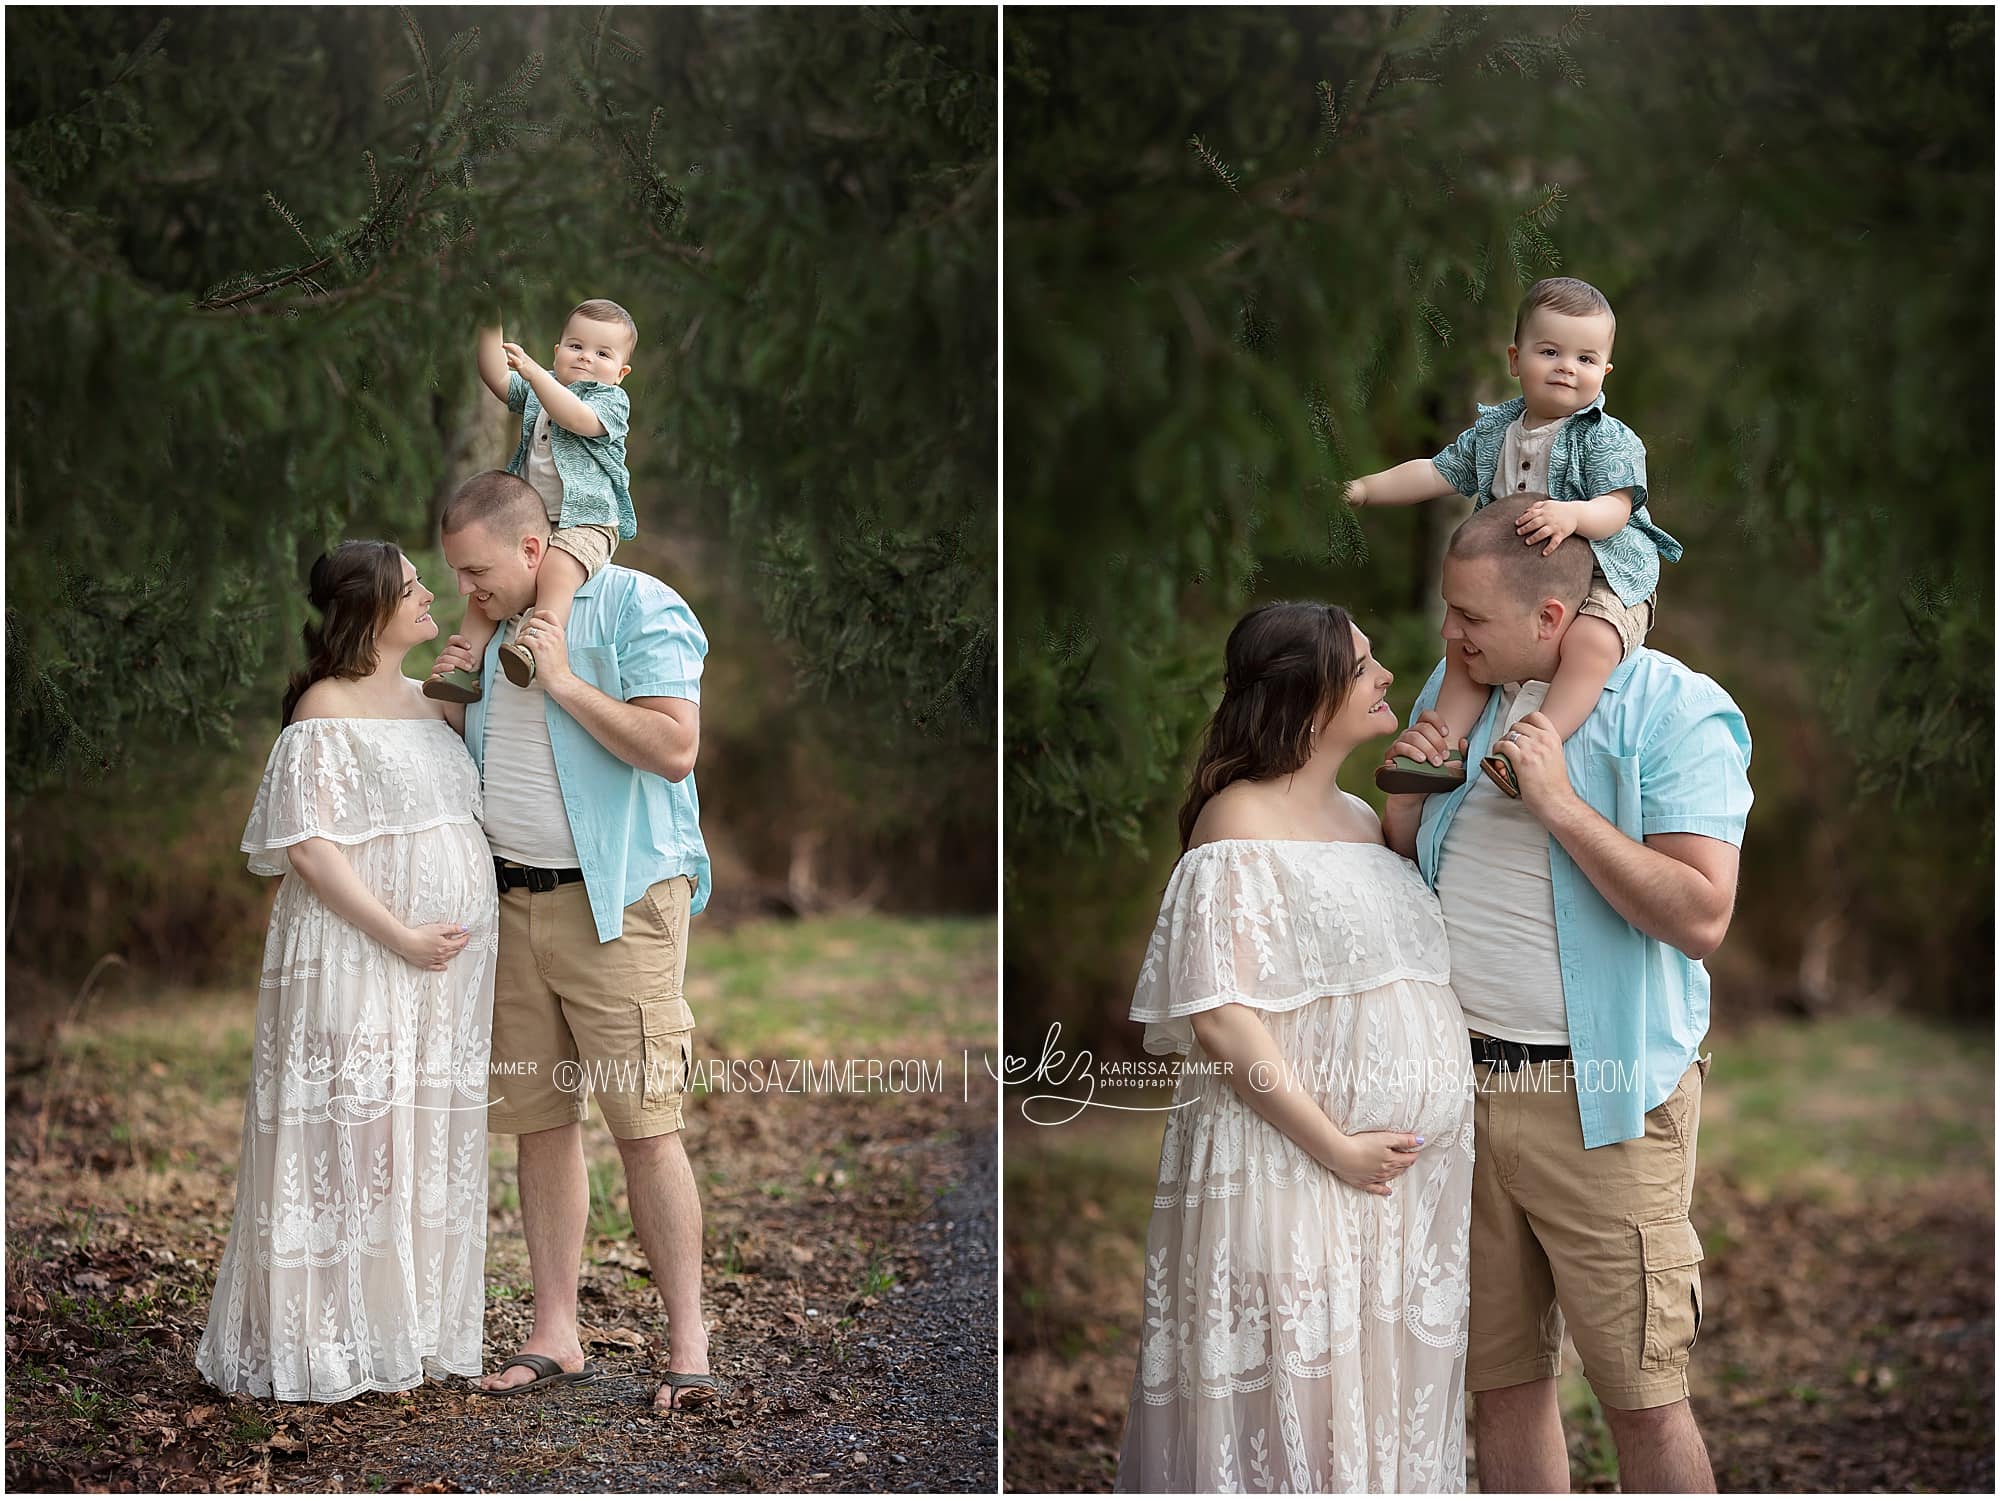 family of 3 poses together at their family and maternity photography session with karissa zimmer photography